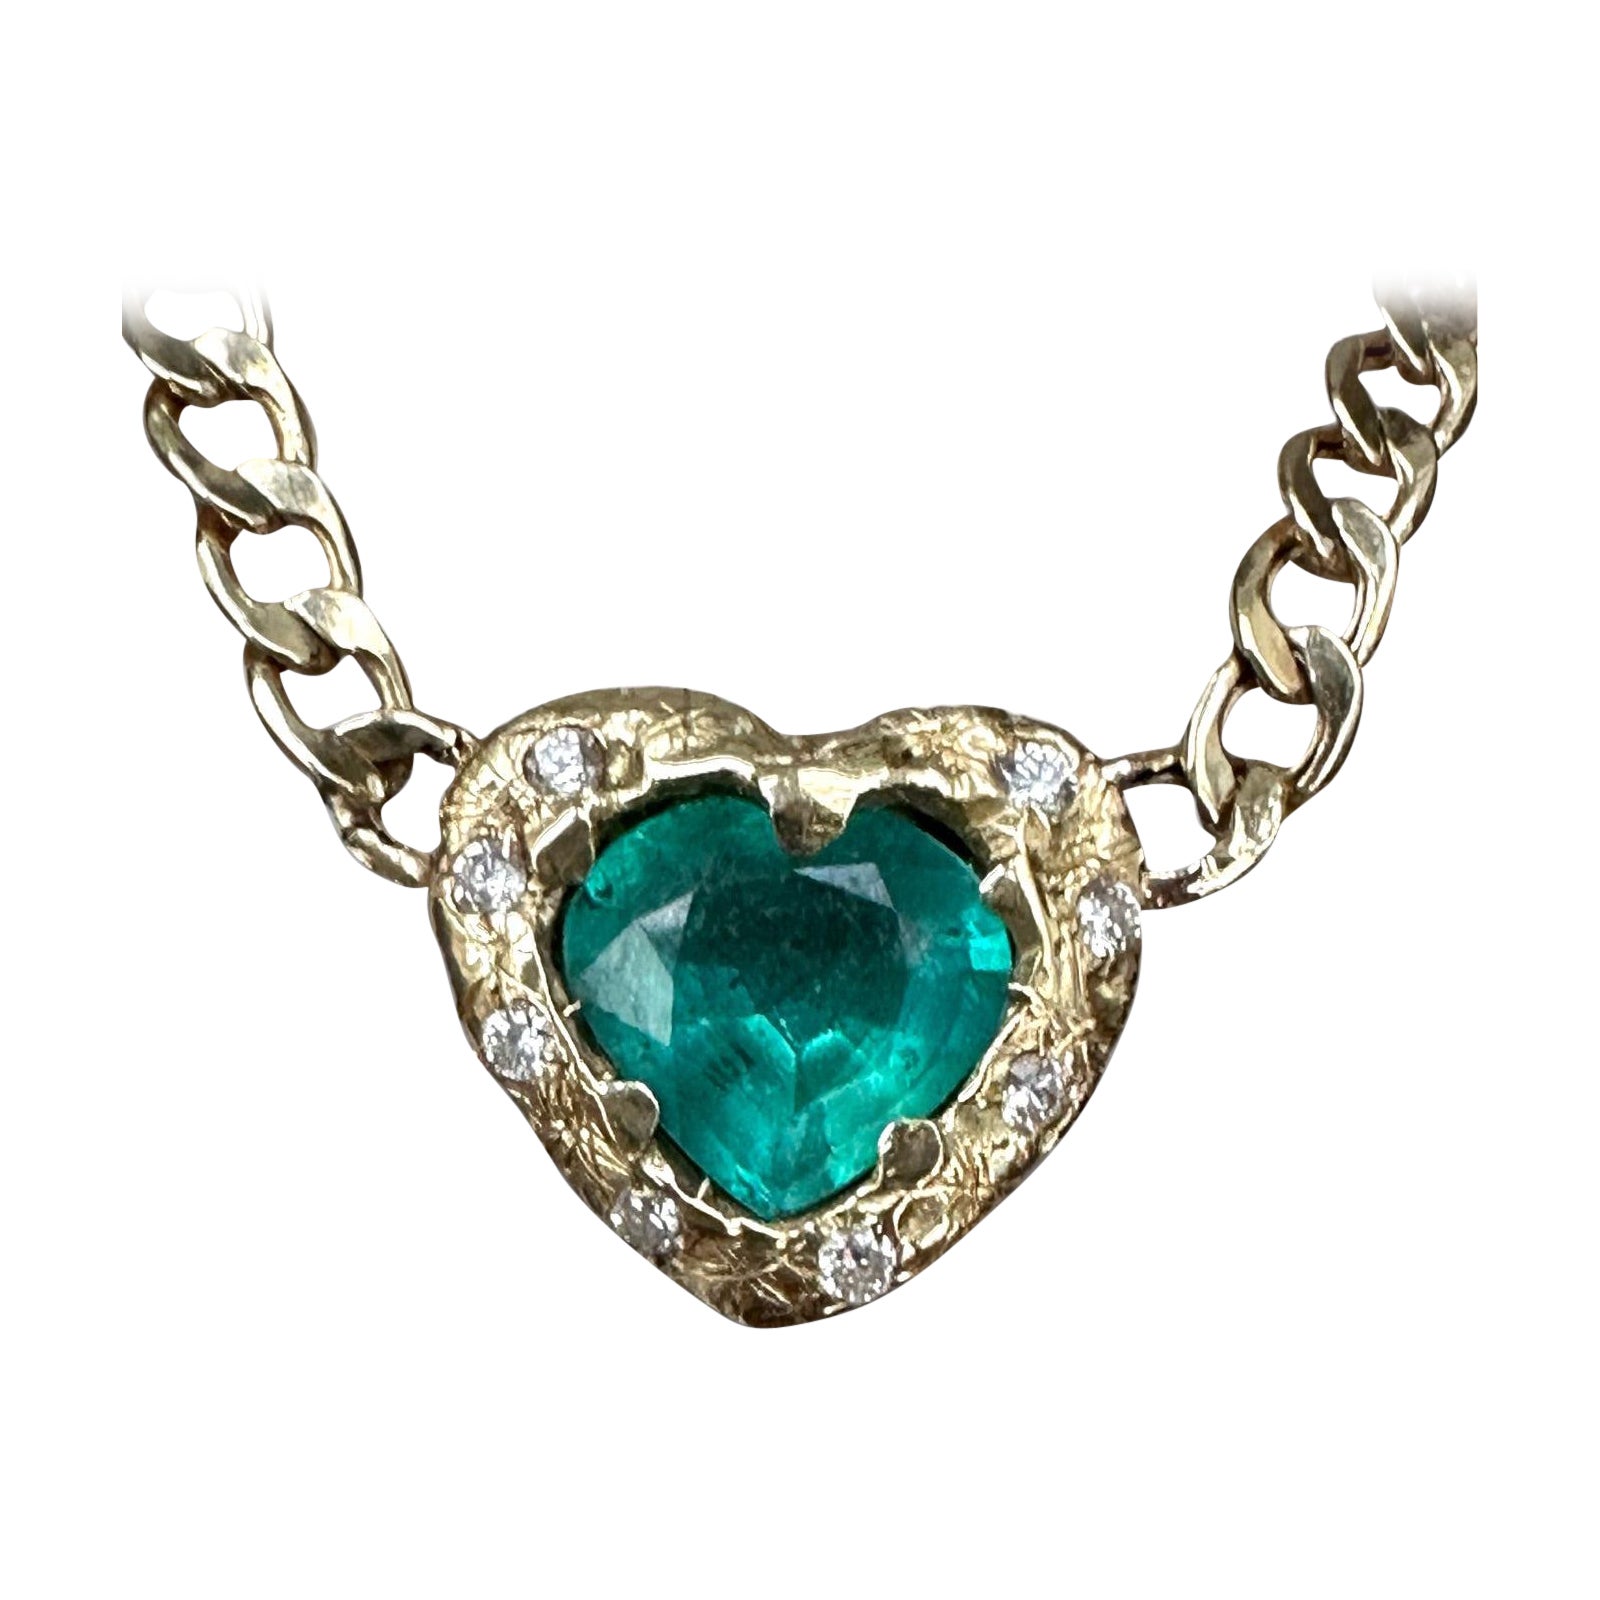 Emerald Heart Necklace and Choker with Diamonds on a Cuban Link Chain One of